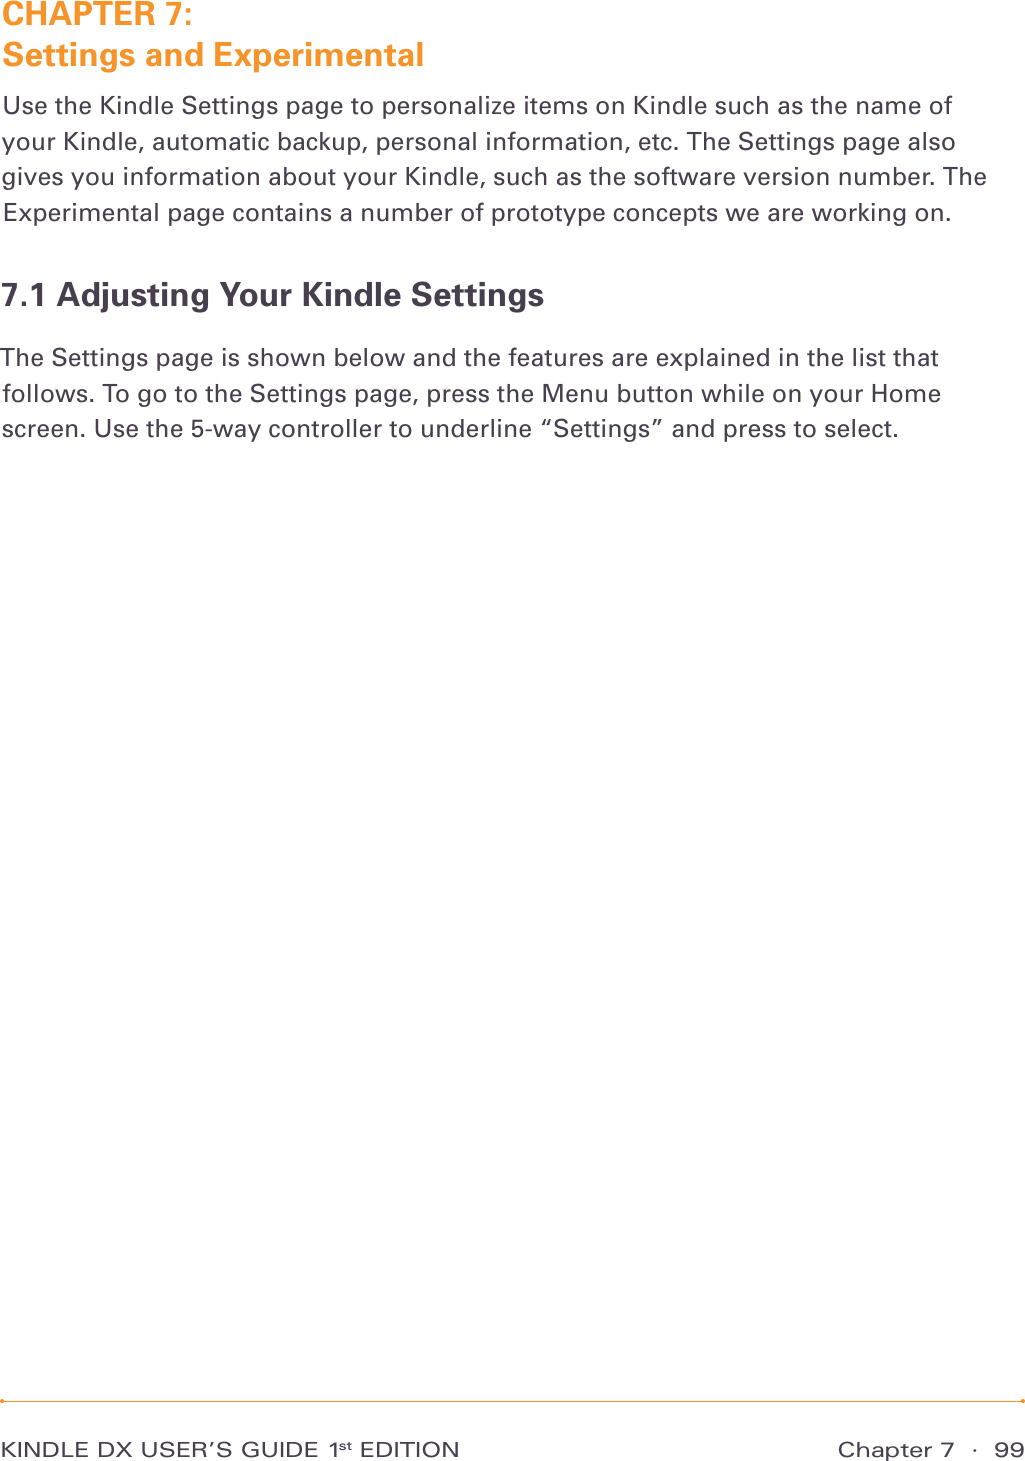 Chapter 7  ·  99KINDLE DX USER’S GUIDE 1st EDITIONCHAPTER 7:  Settings and ExperimentalUse the Kindle Settings page to personalize items on Kindle such as the name of your Kindle, automatic backup, personal information, etc. The Settings page also gives you information about your Kindle, such as the software version number. The Experimental page contains a number of prototype concepts we are working on.7.1 Adjusting Your Kindle SettingsThe Settings page is shown below and the features are explained in the list that follows. To go to the Settings page, press the Menu button while on your Home screen. Use the 5-way controller to underline “Settings” and press to select.